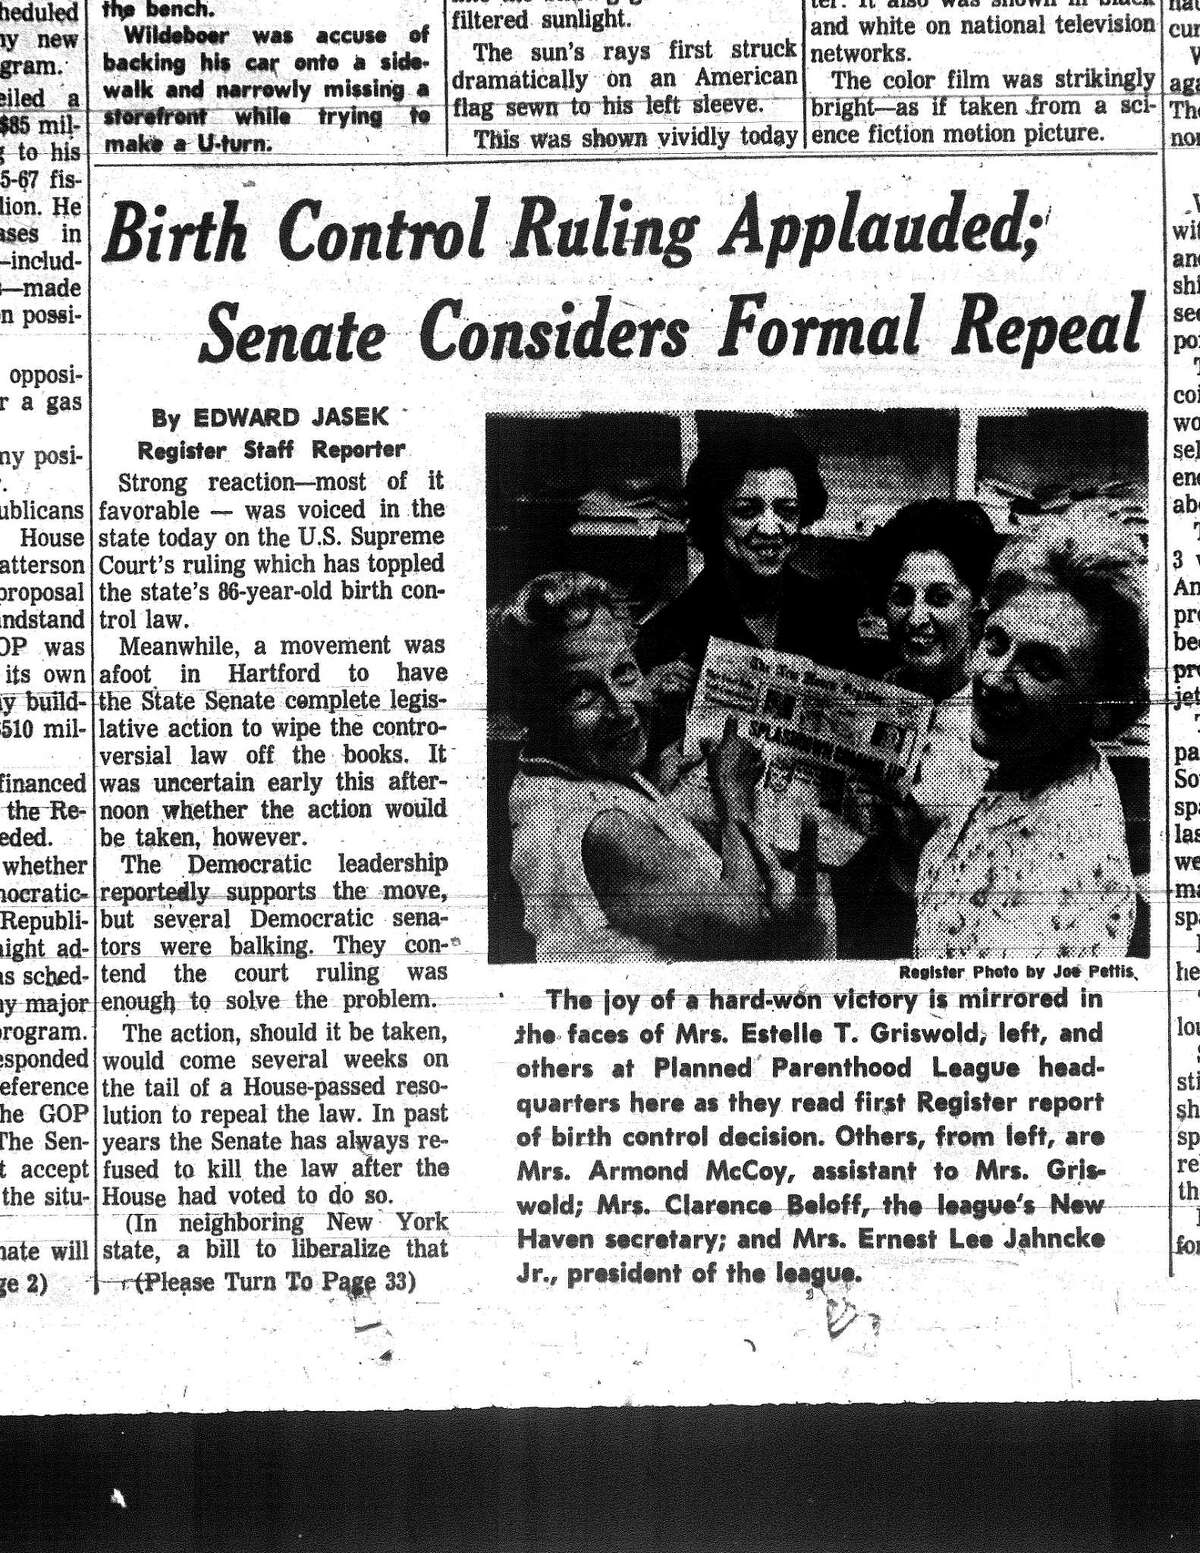 A clipping from the front page of the New Haven Register of June 8, 1965, shows Estelle Griswold (left in foreground) and Cornelia Jahncke (right in foreground), president of the Planned Parenthood League of Connecticut, celebrating the U.S. Supreme Court’s decision of Griswold vs. Connecticut.